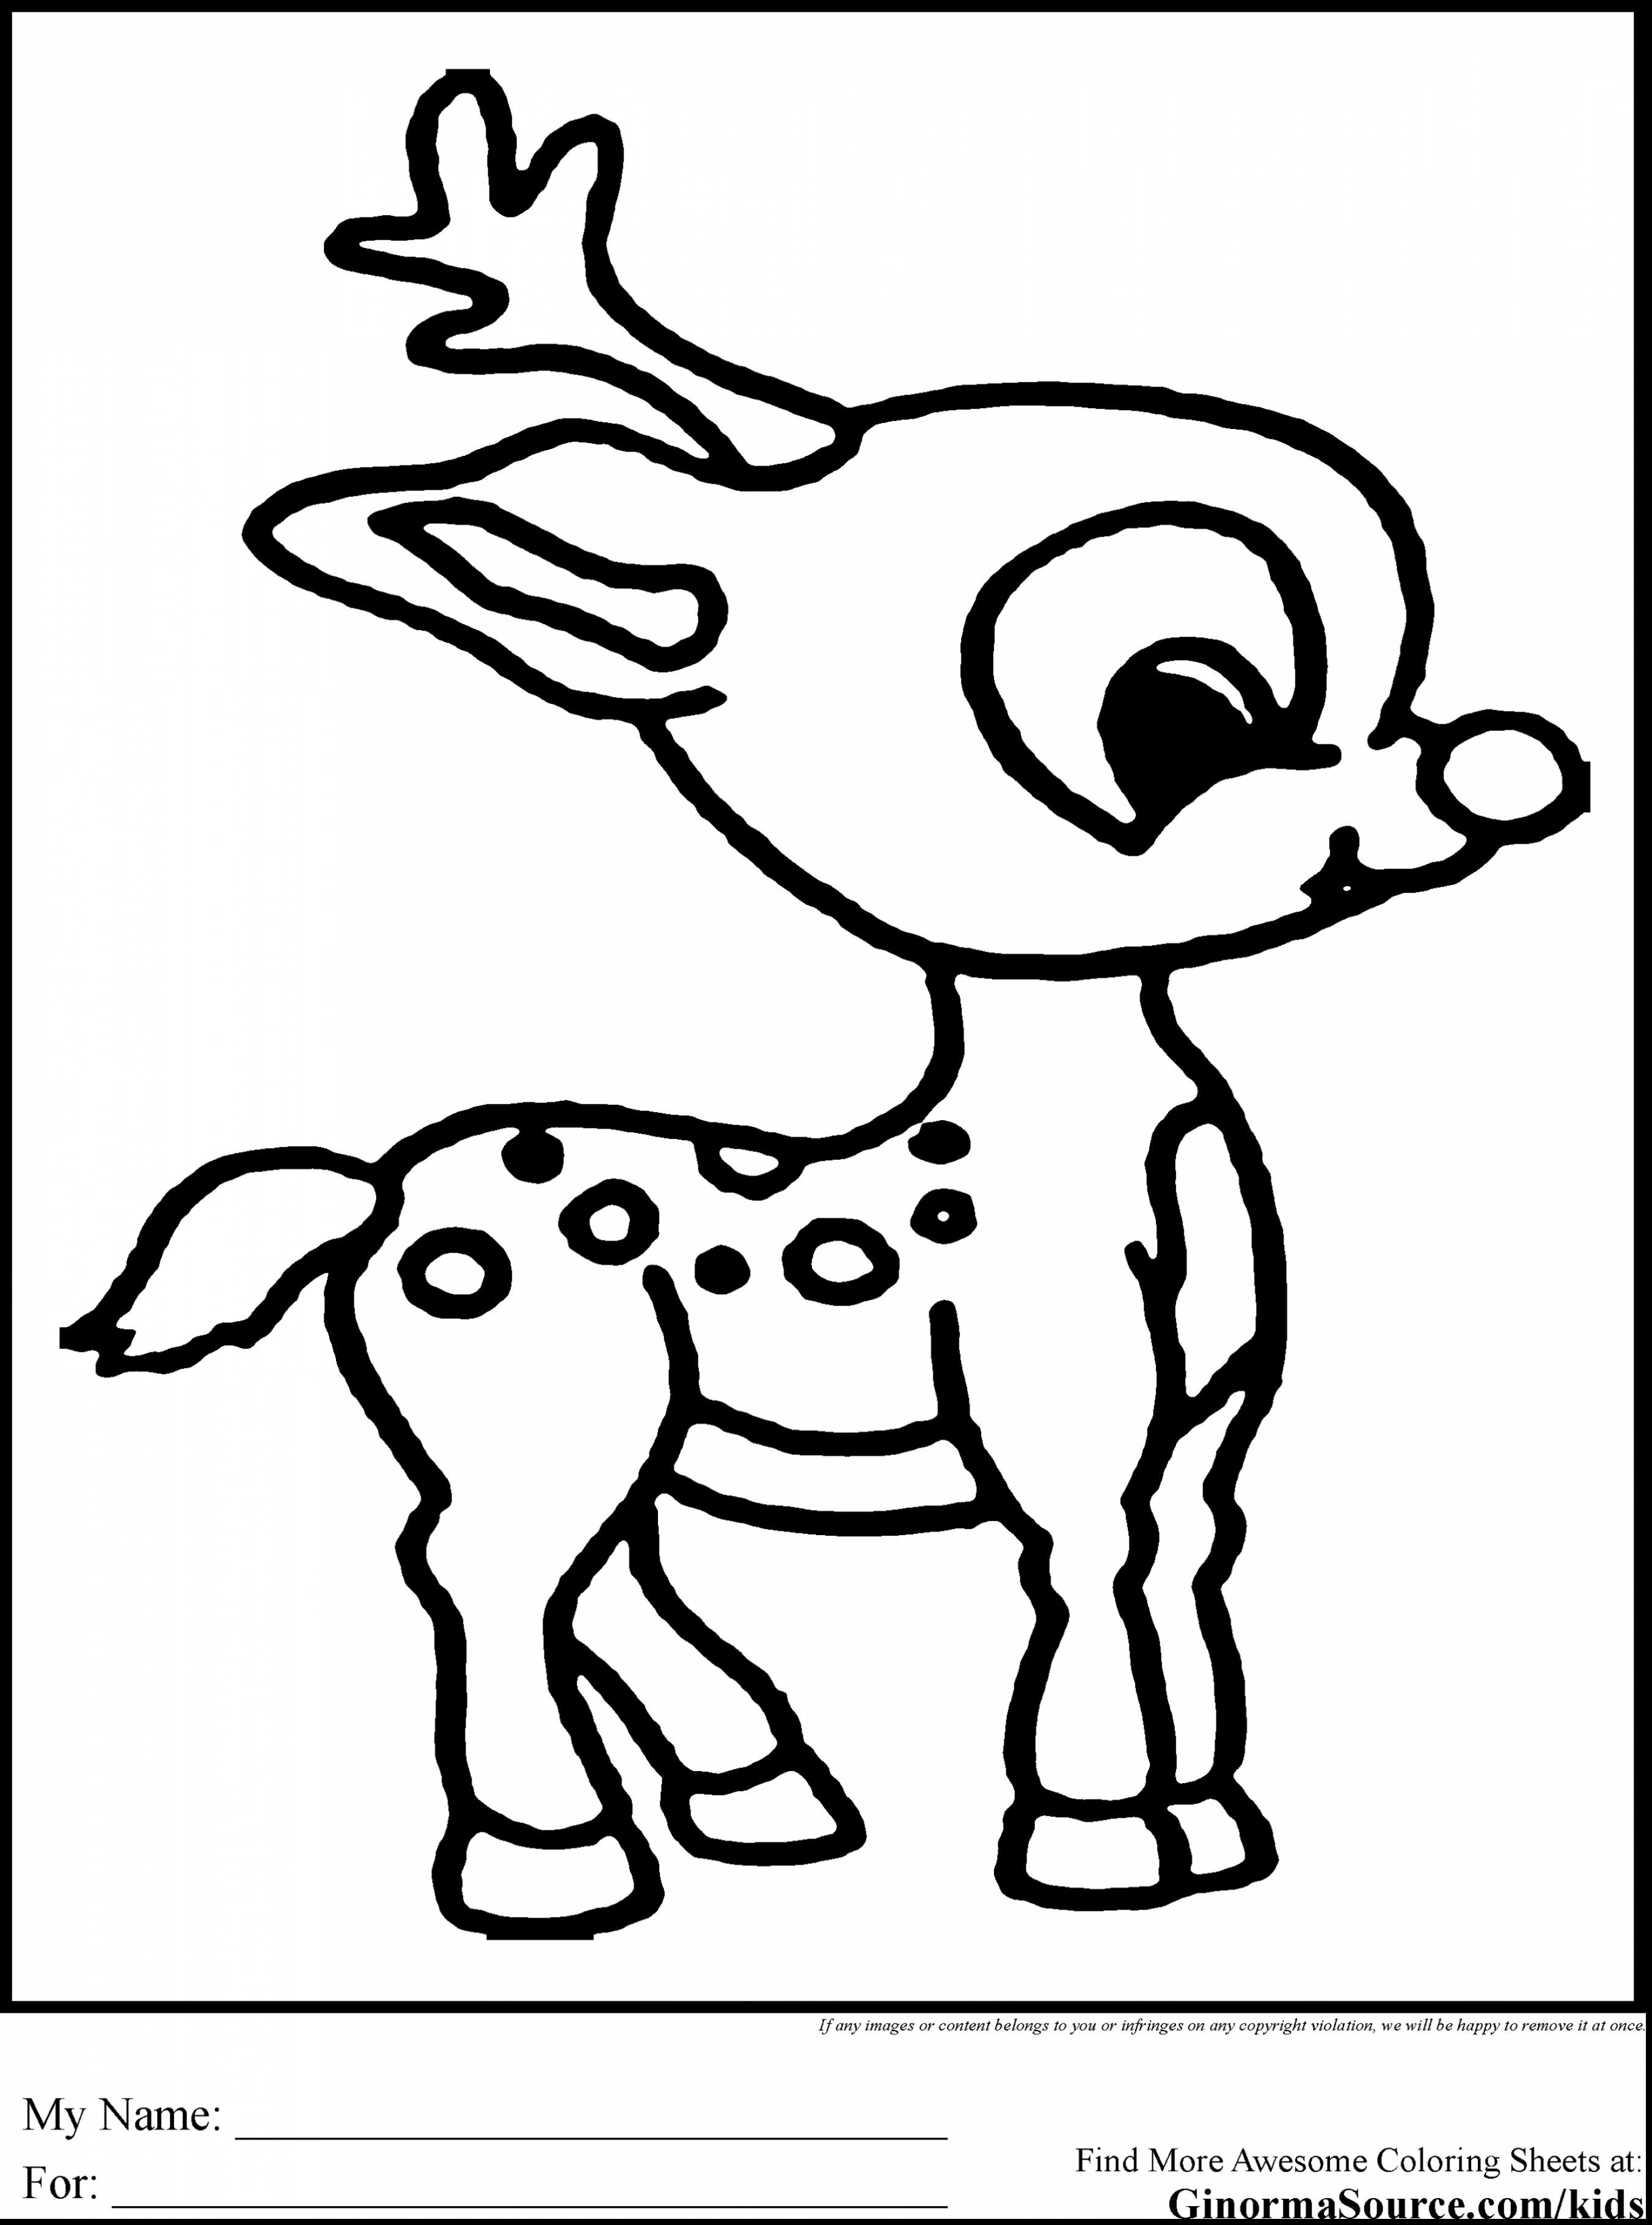 Cute Rudolph Coloring Pages at GetColorings.com | Free printable